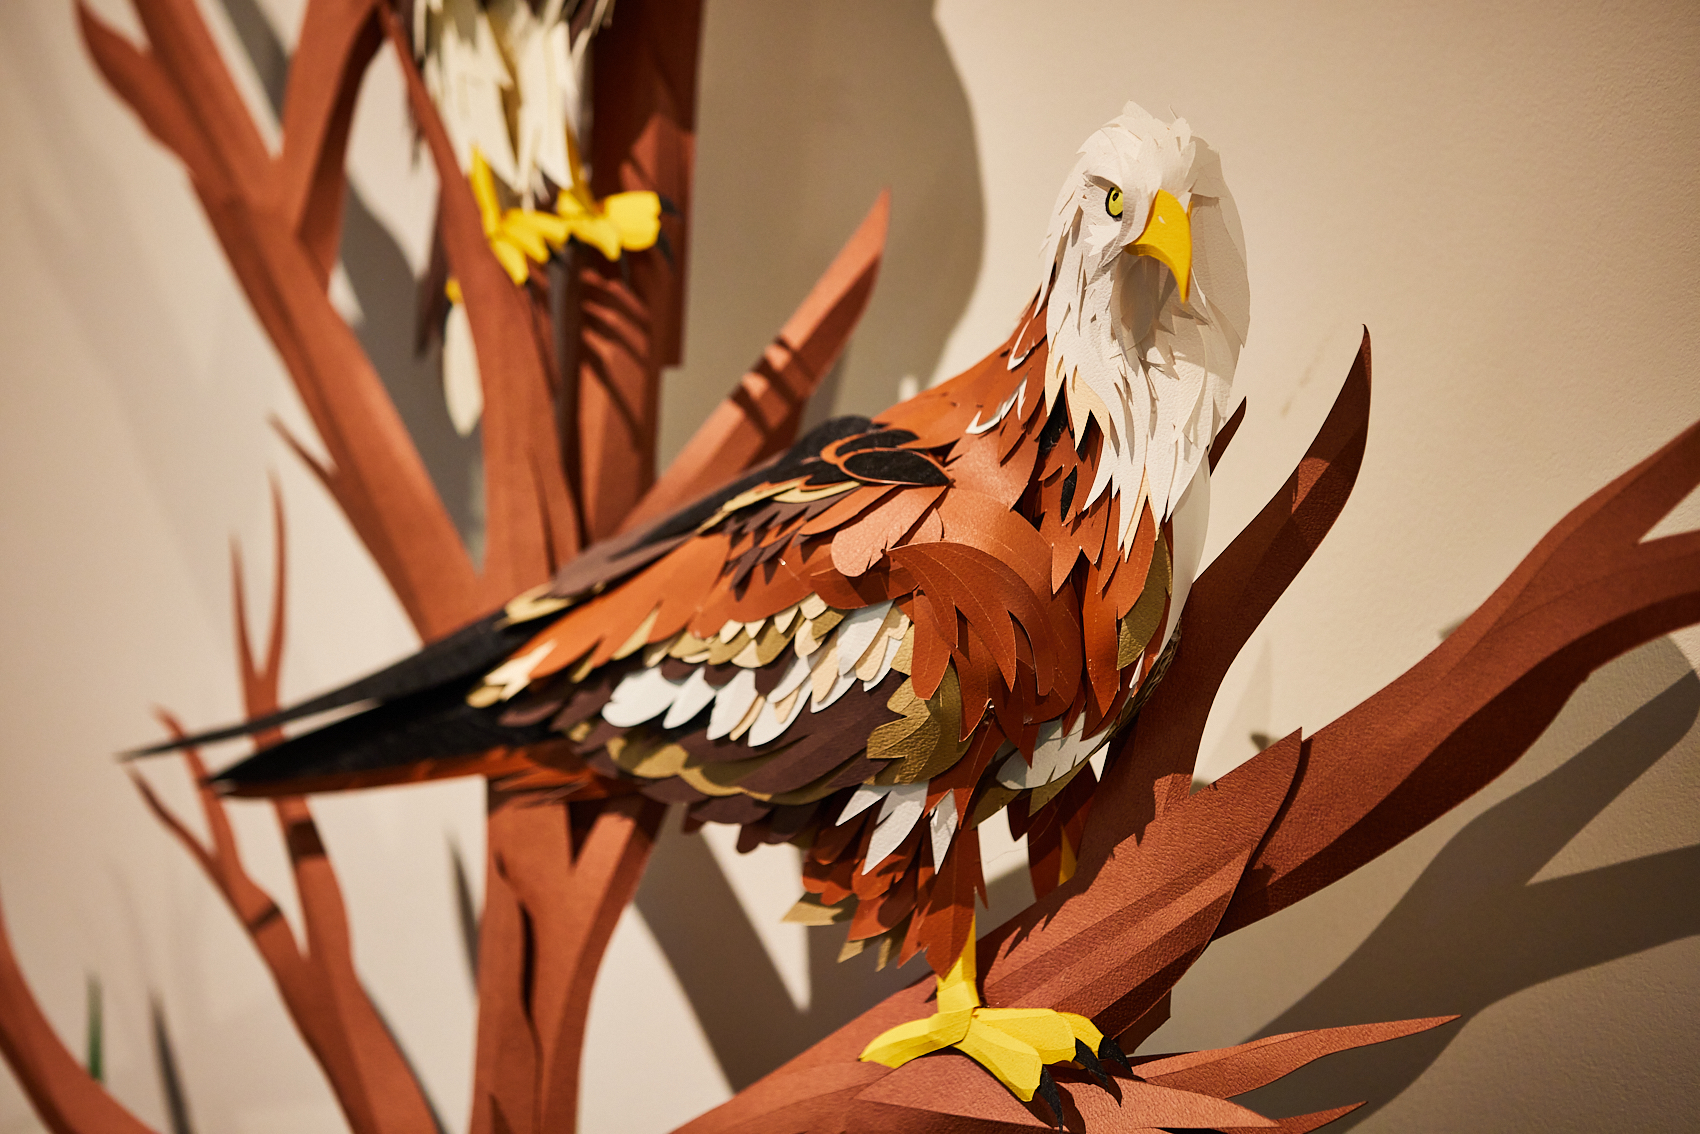 Paper sculptures by Andy Singleton at A World of Good, Wakefield Museum